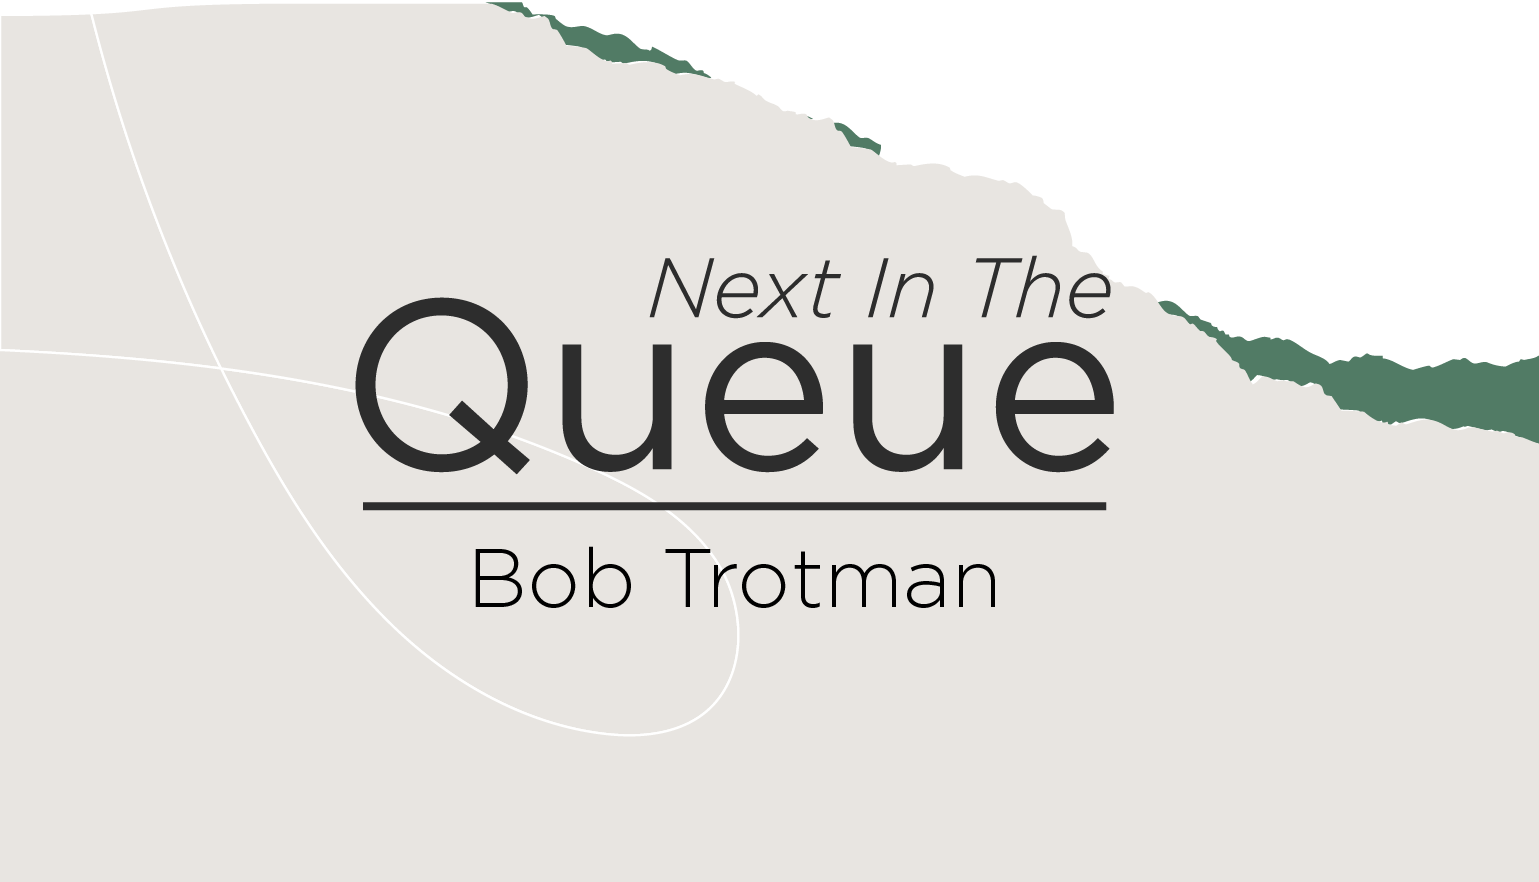 blog post cover graphic for The Queue featuring Bob Trotman